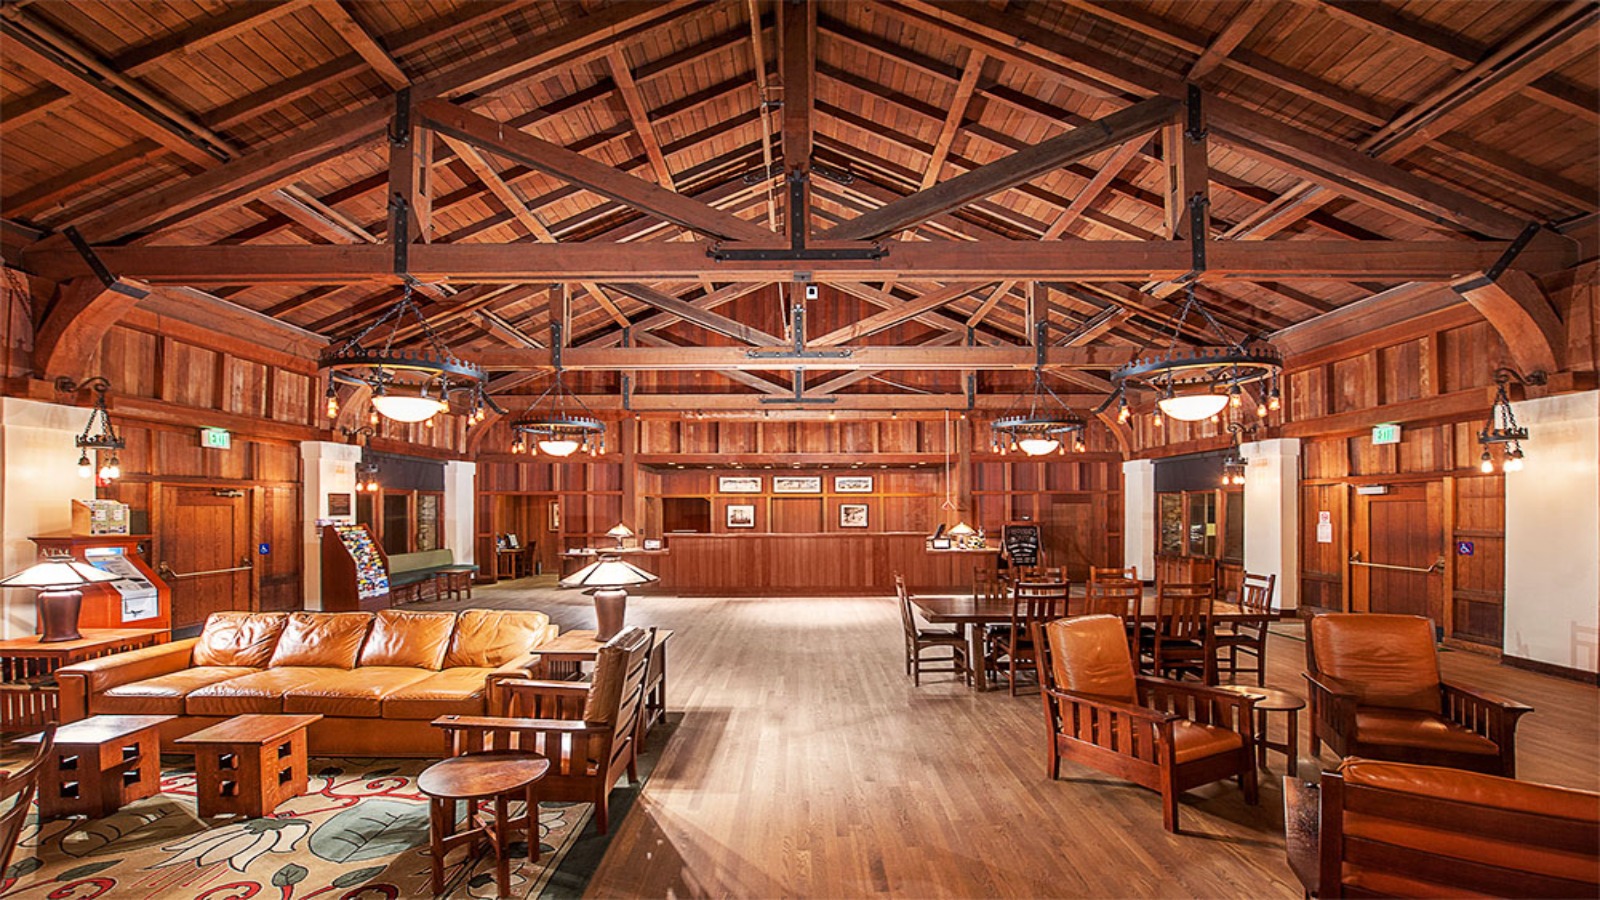 Interior of wood-built room at Asilomar Conference Grounds in Monterey, California